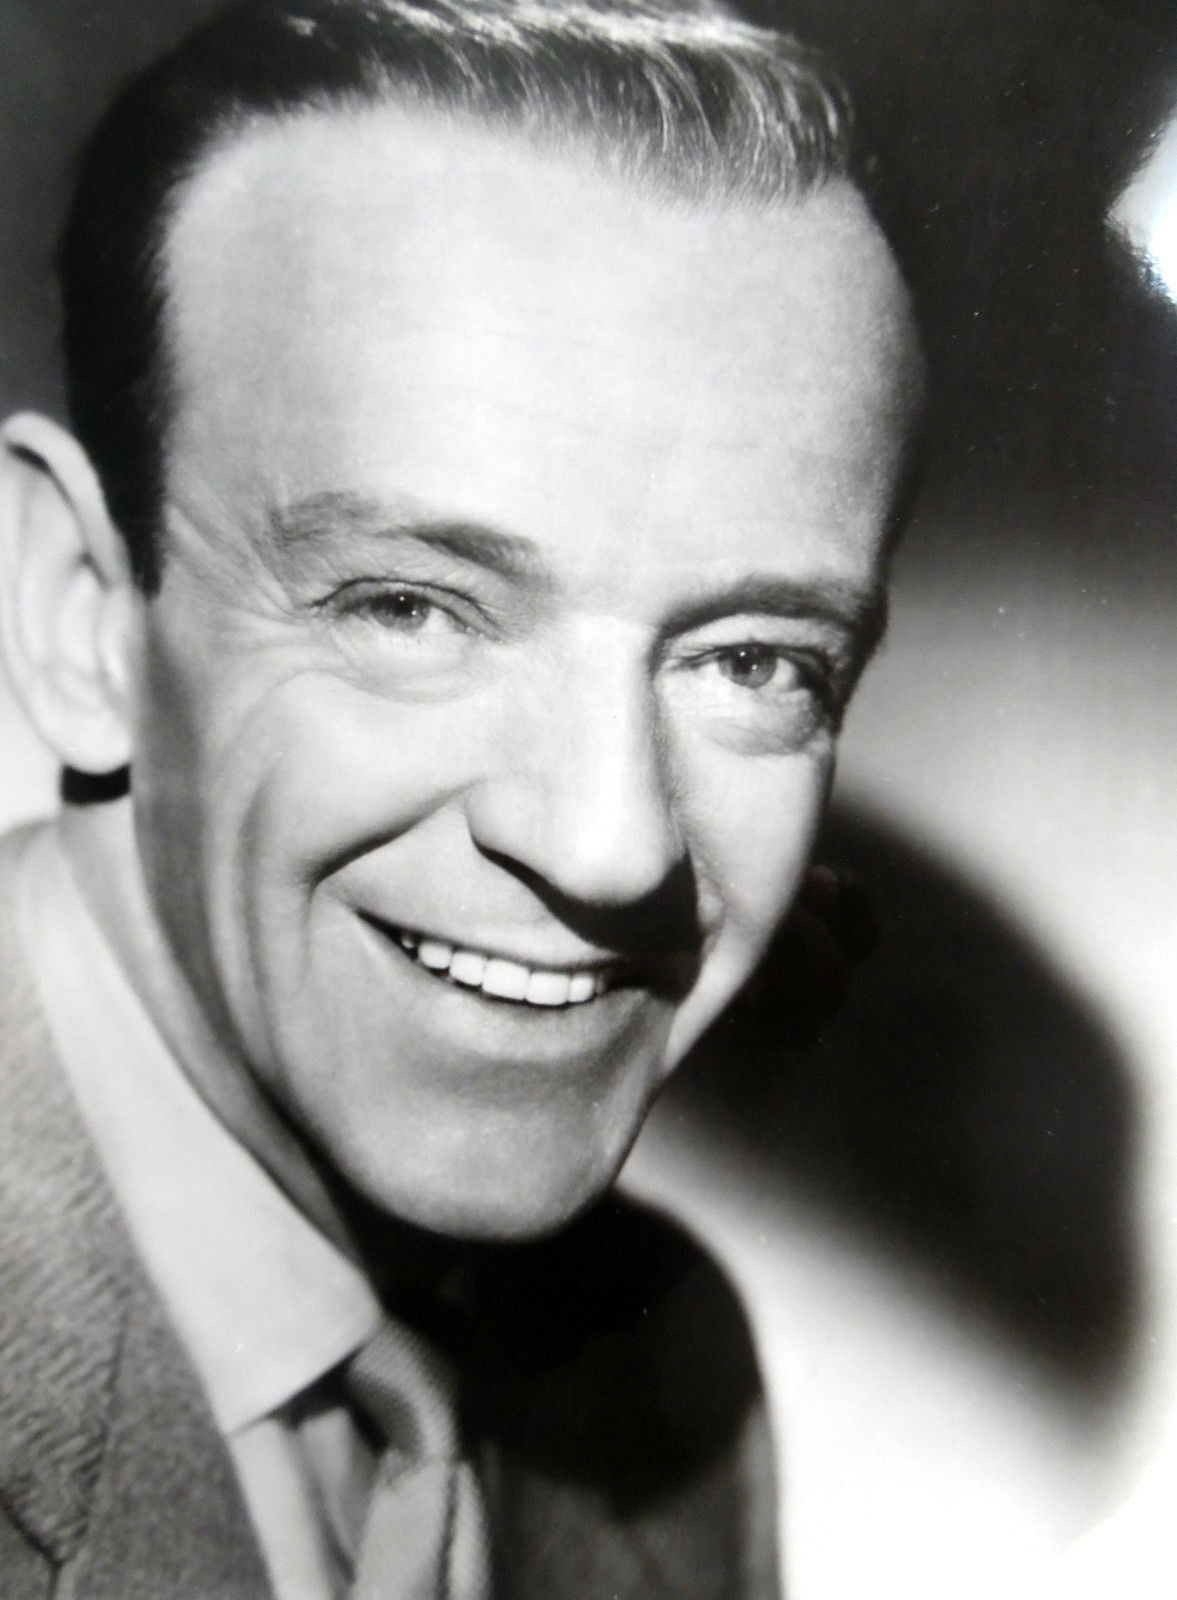 FRED ASTAIRE 8x10 Film Publicity Portrait Photo Poster painting Singer ACTOR Dancer GINGER dt184